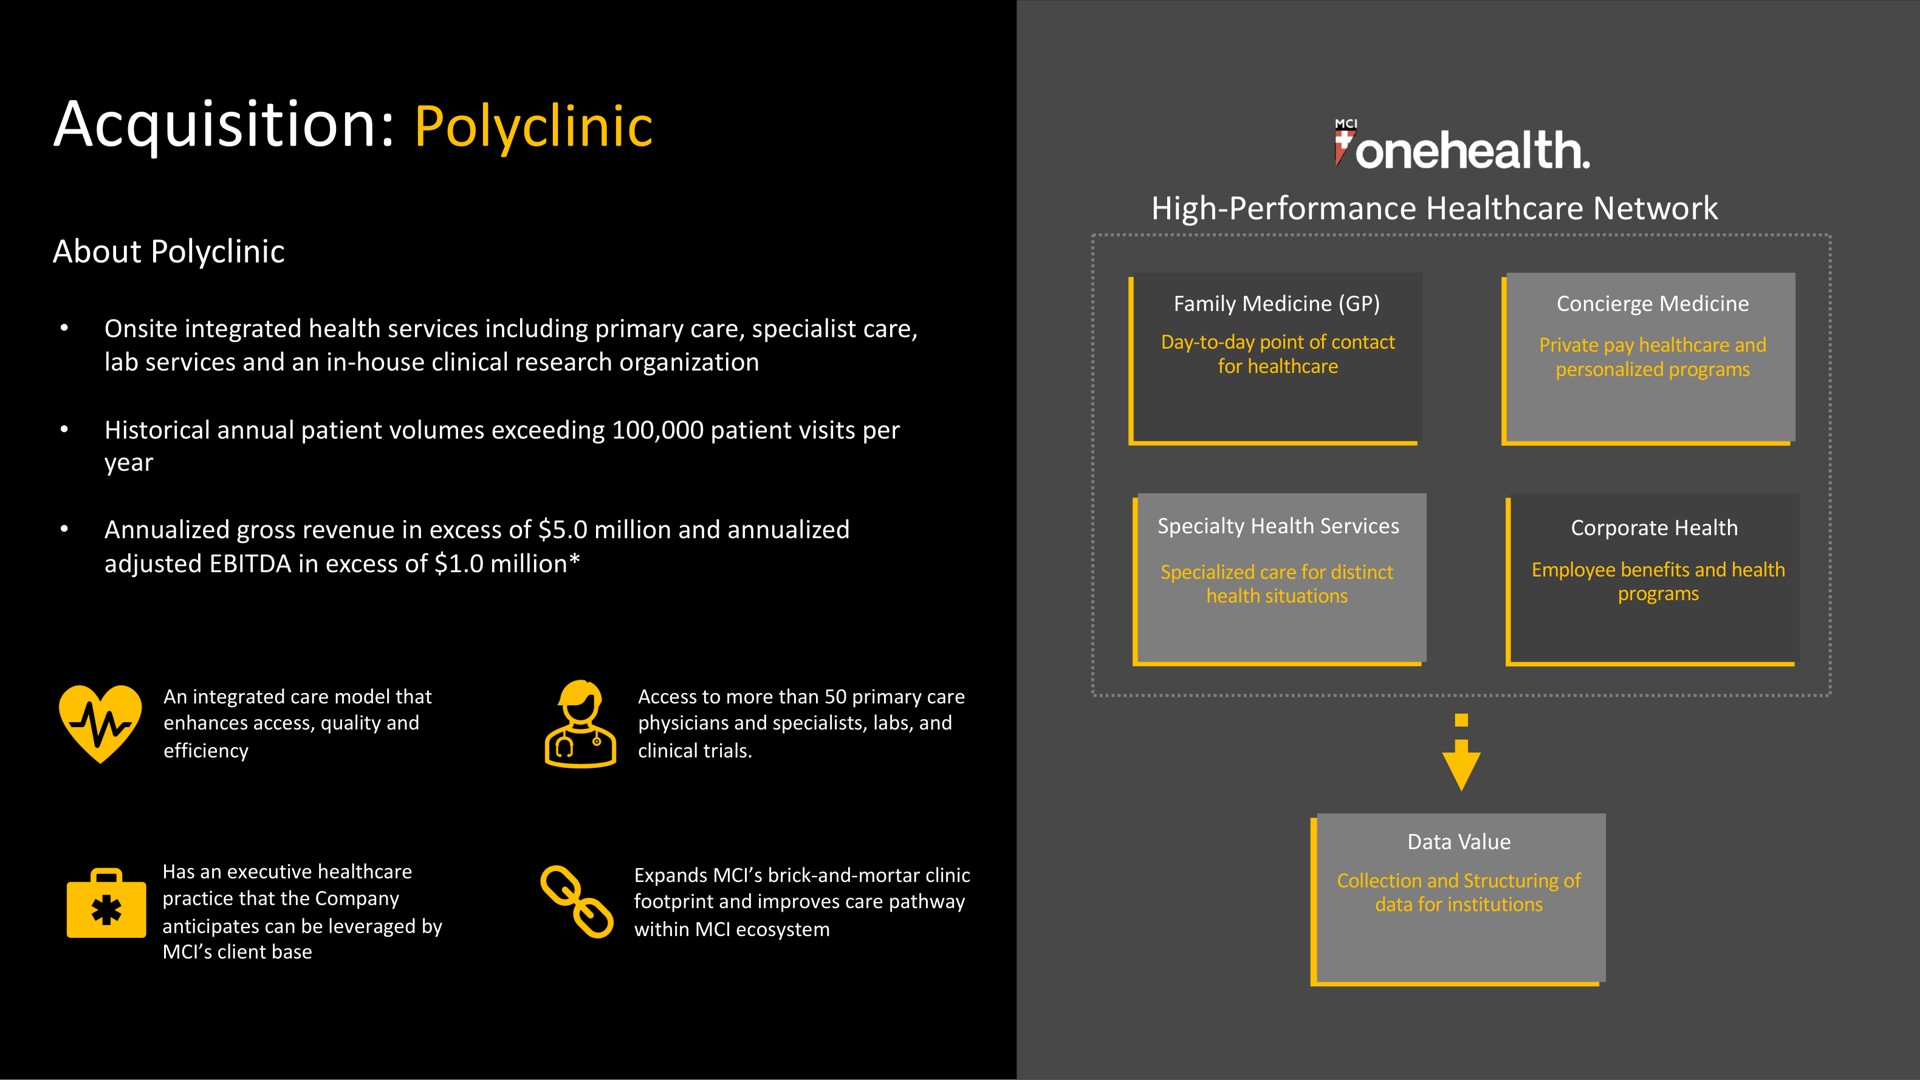 acquisition polyclinic | MCI Onehealth